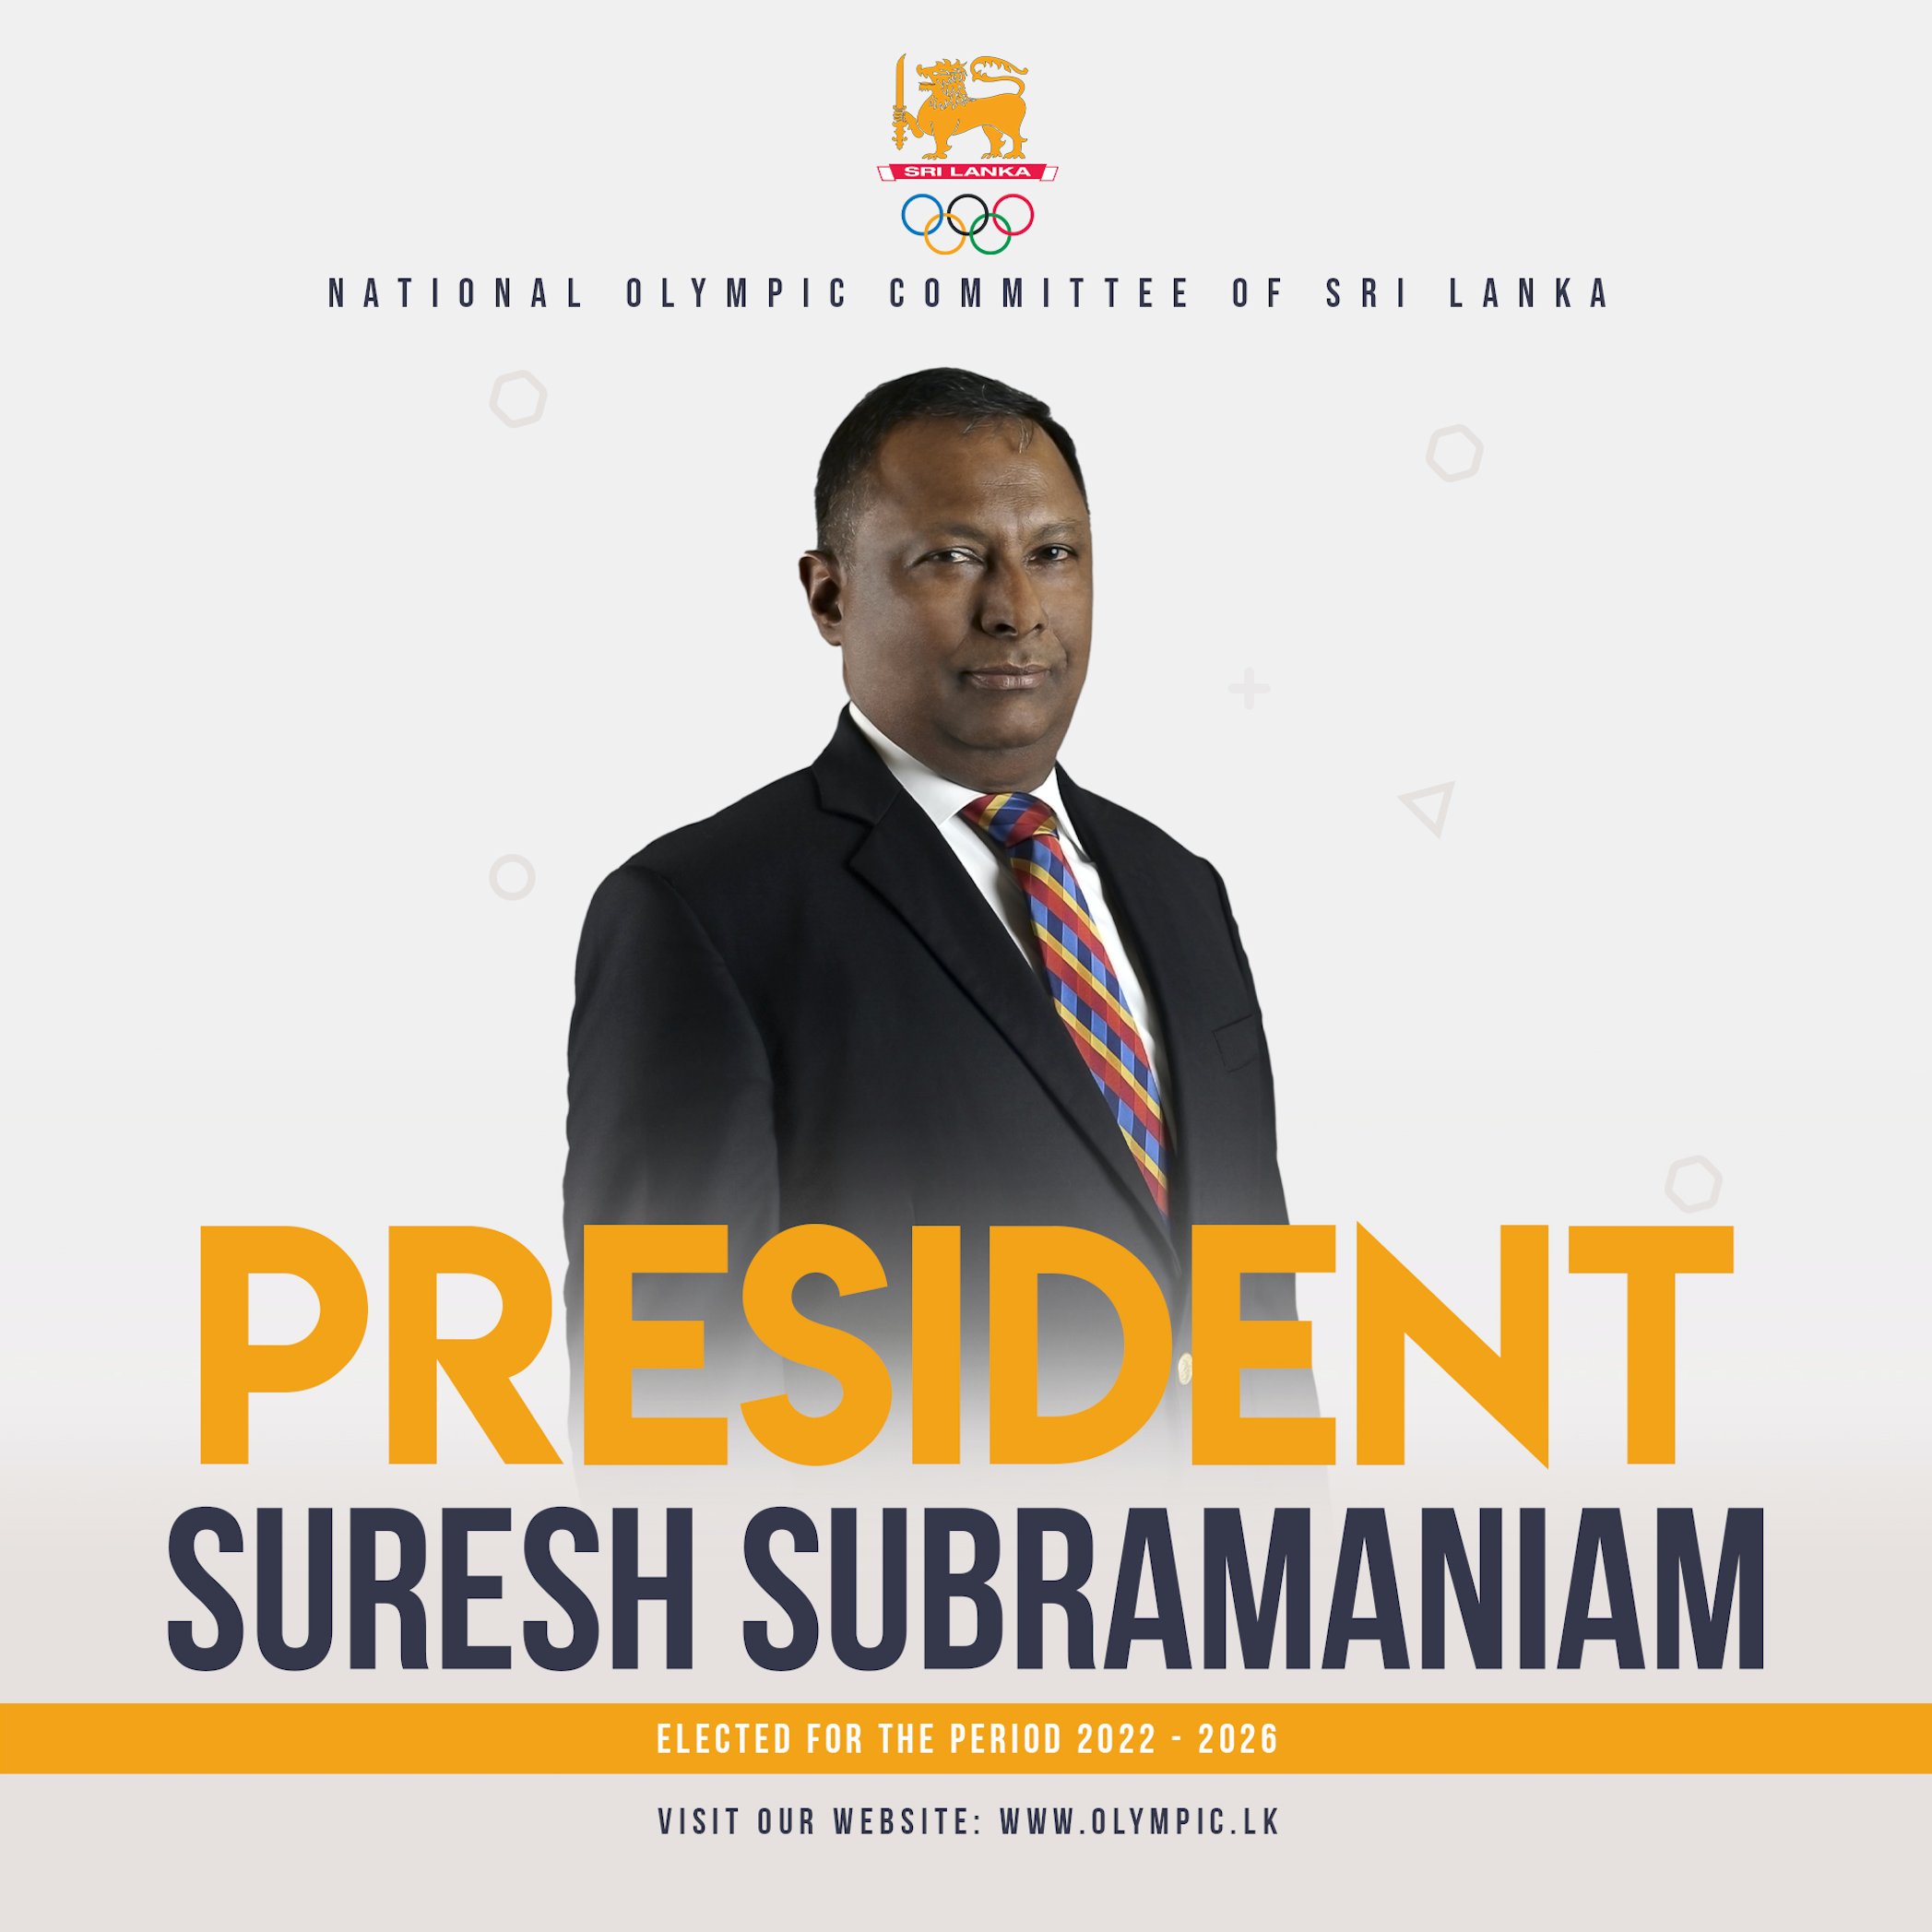 Suresh Subramaniam elected as the President of the National Olympic Committee